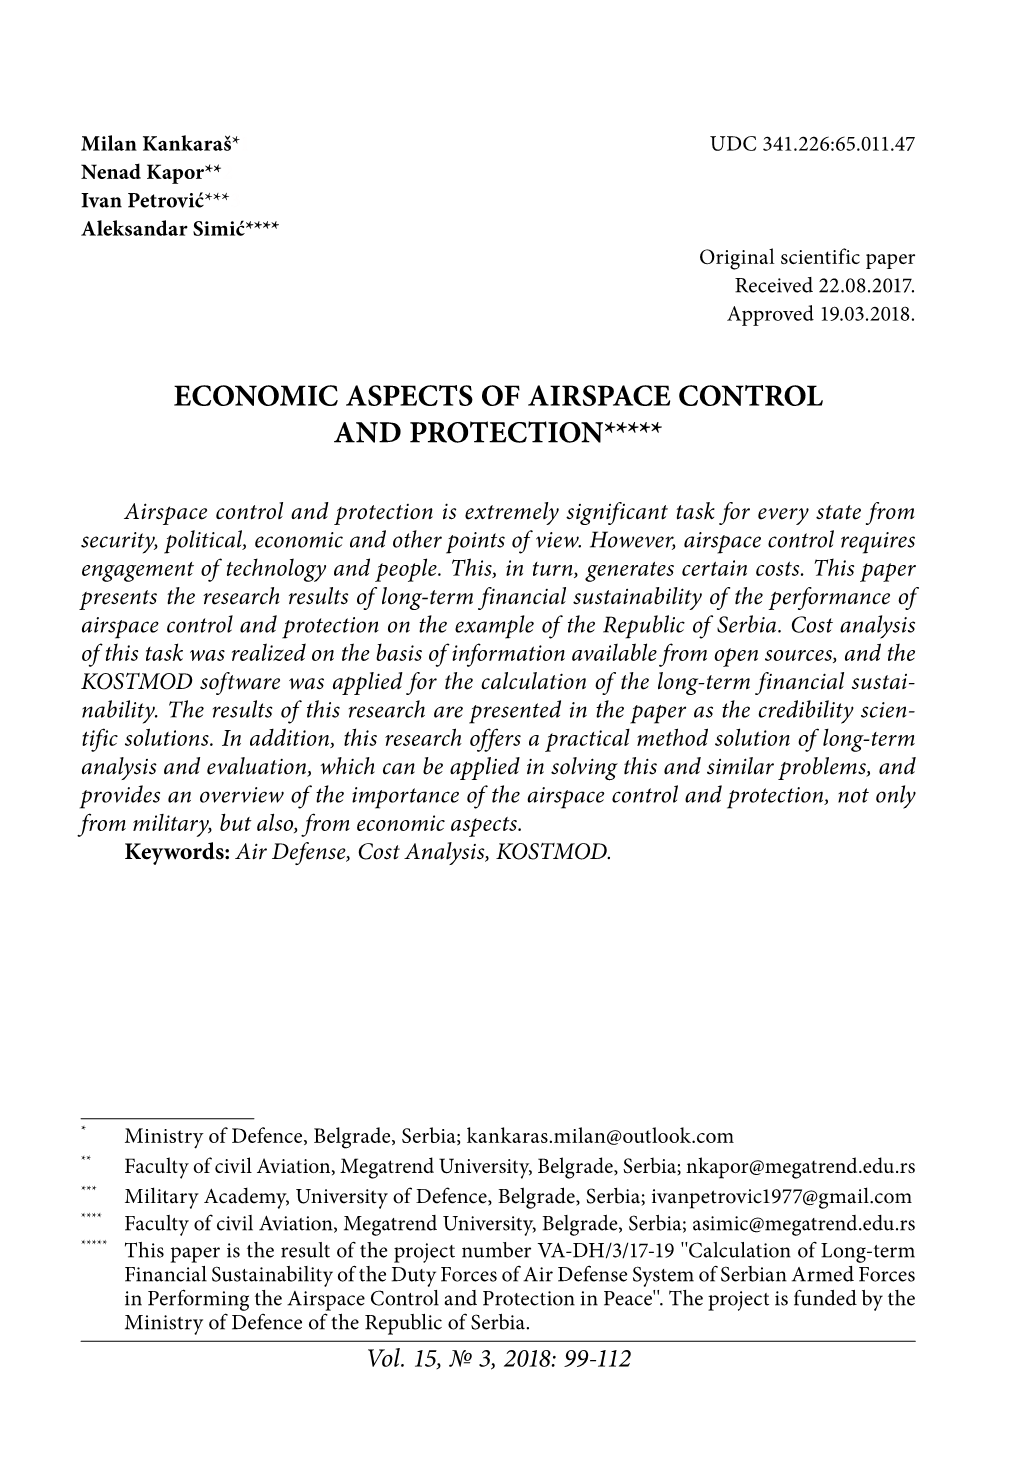 Economic Aspects of Airspace Control and Protection*****